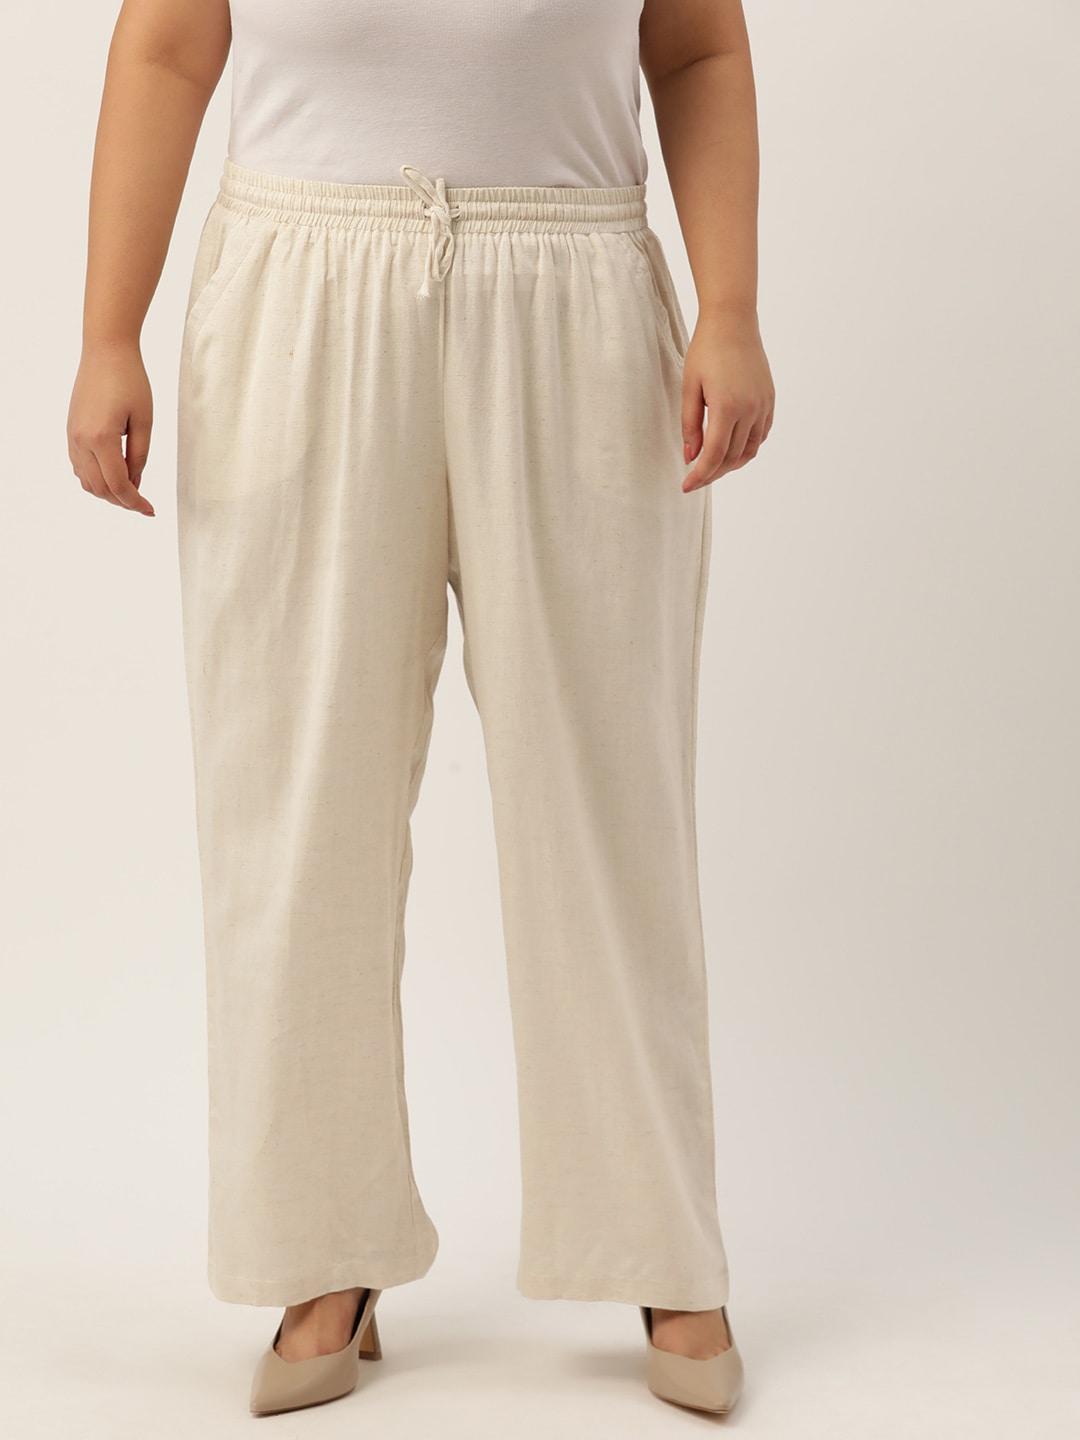 theRebelinme Plus Size Urban High-Rise Pure Linen Trousers